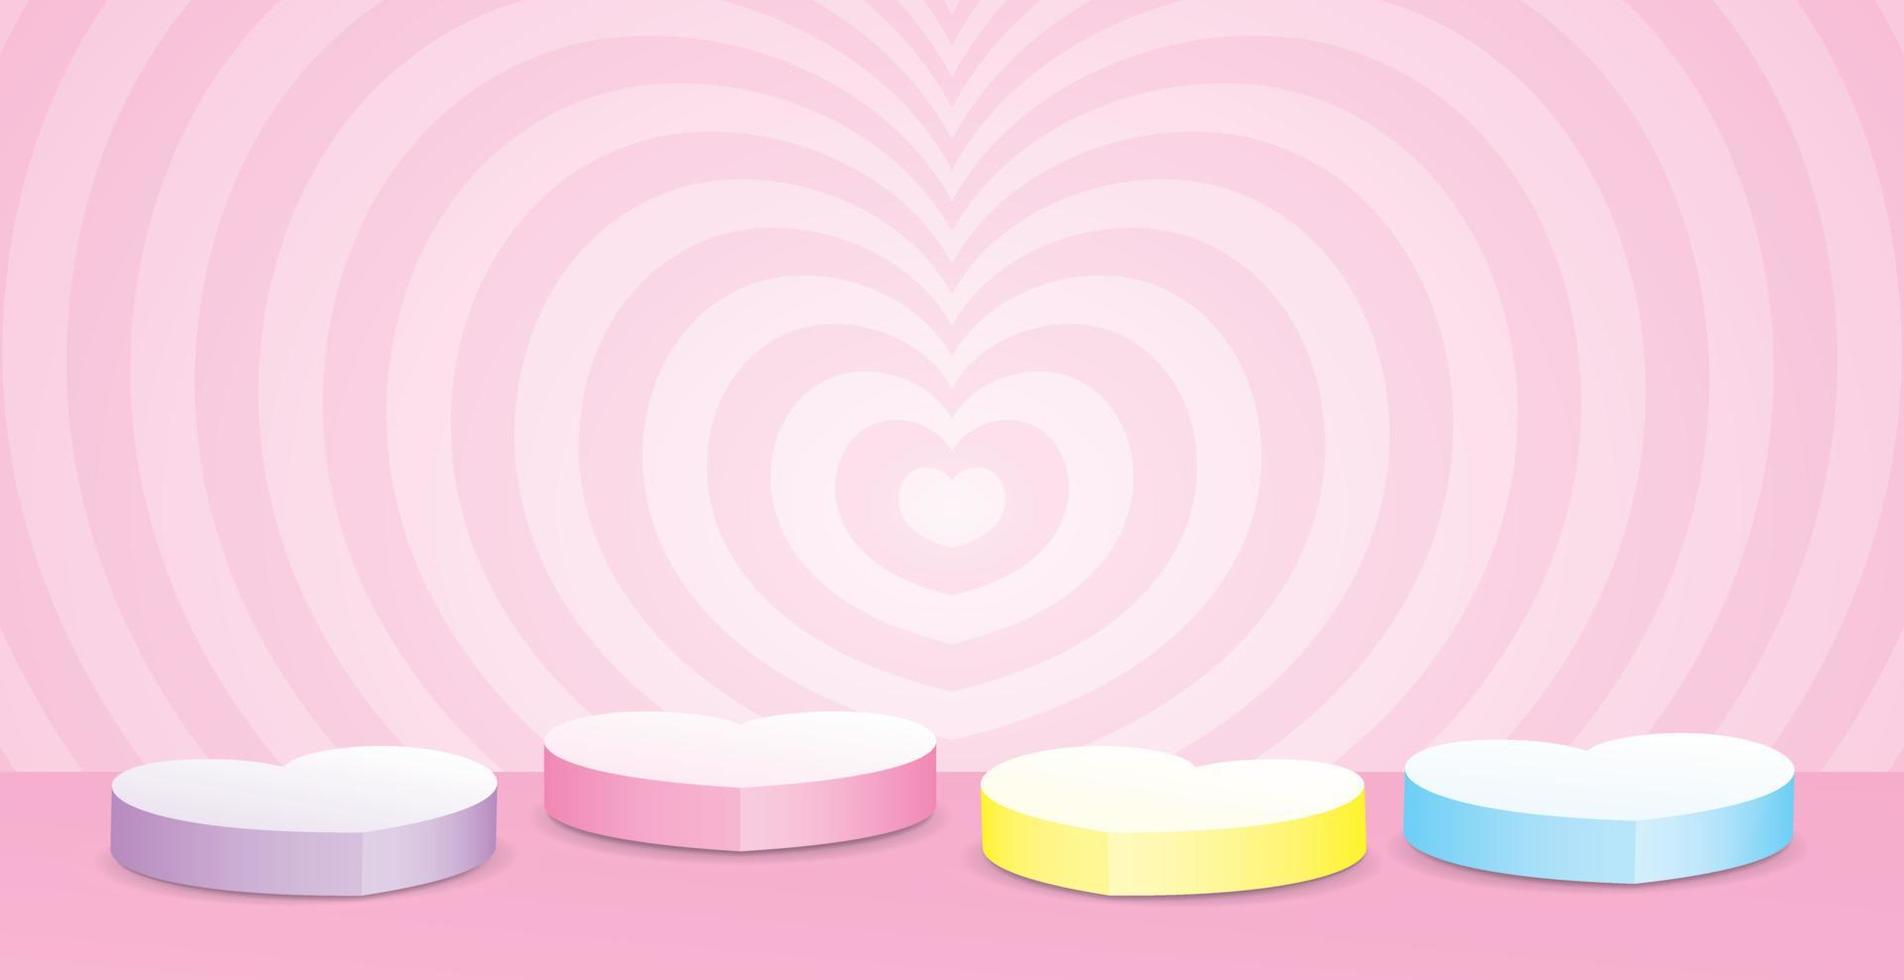 sweet pastel heart shape podiums 3d illustration vector with cute heart graphic wall background for putting your object